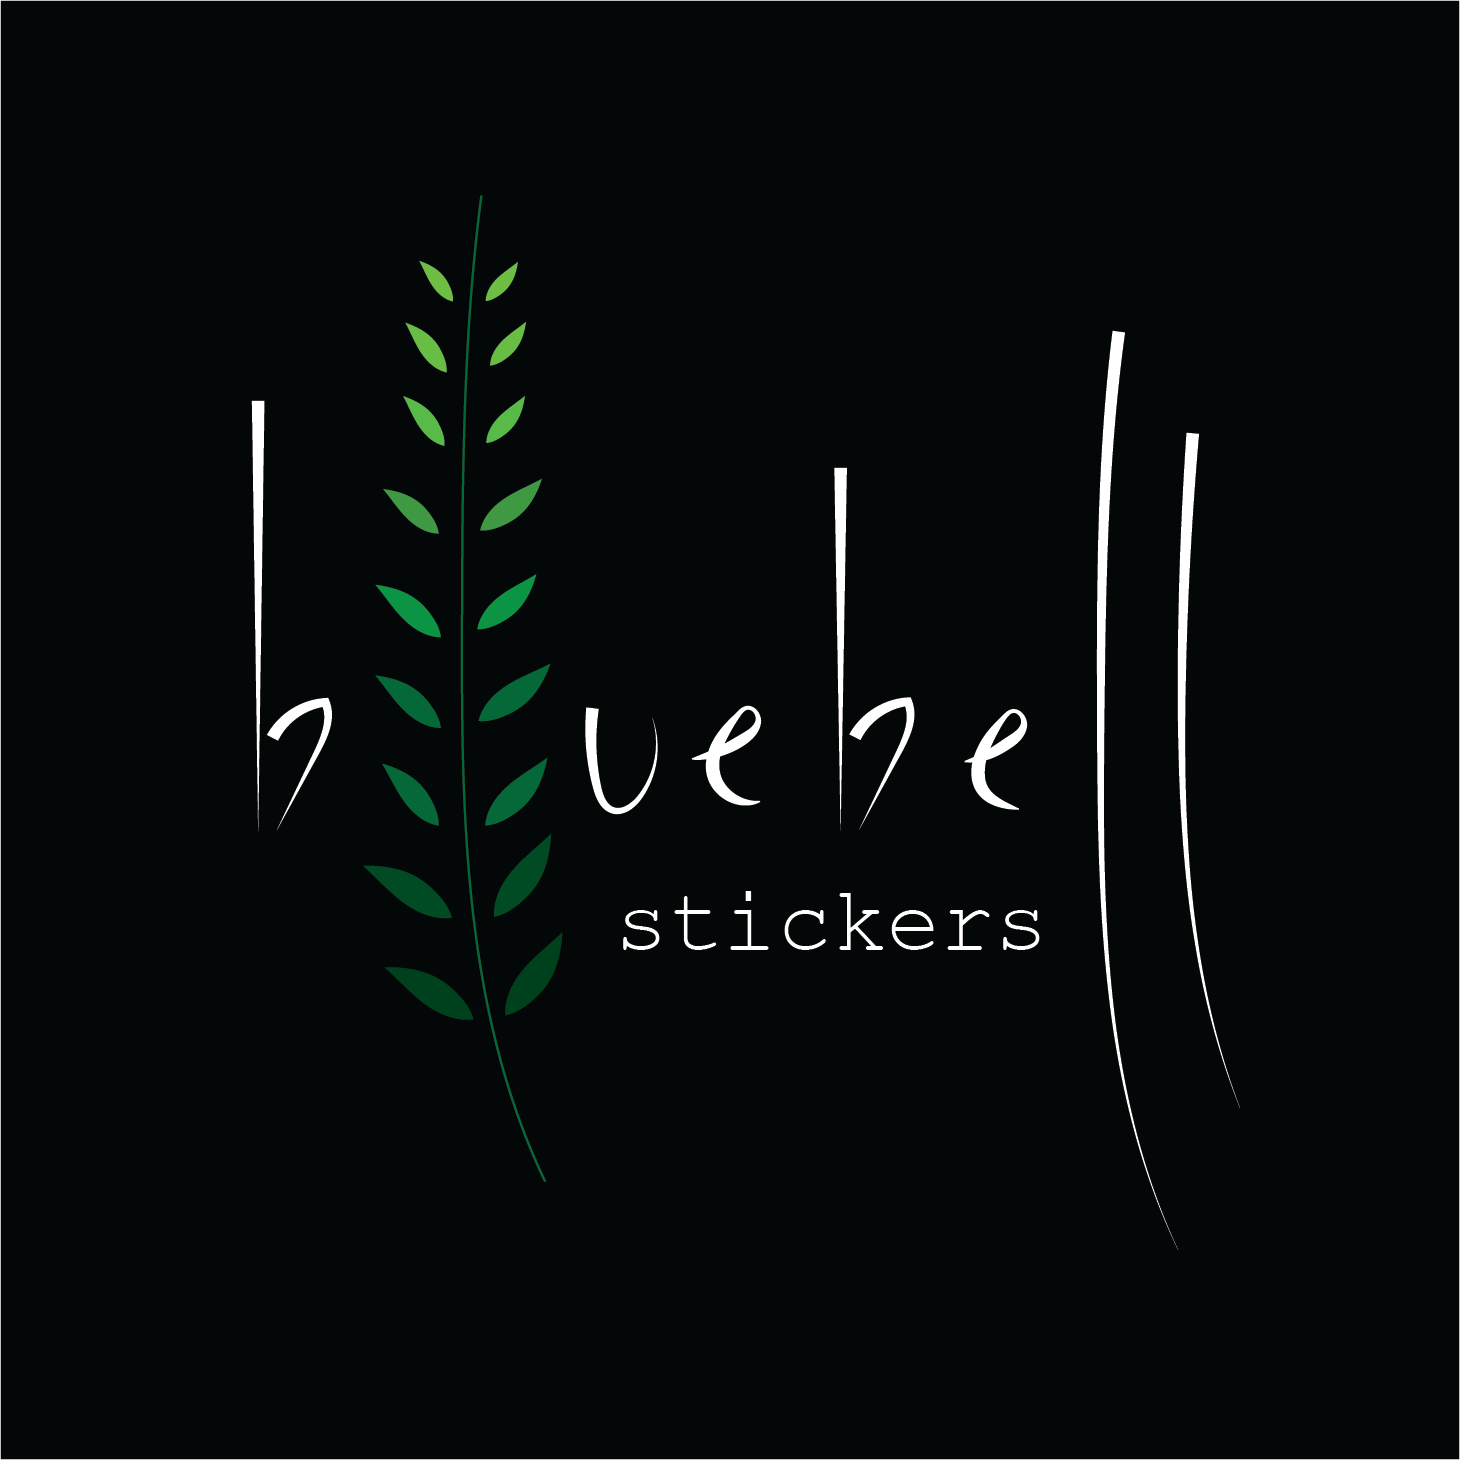 Bluebell stickers